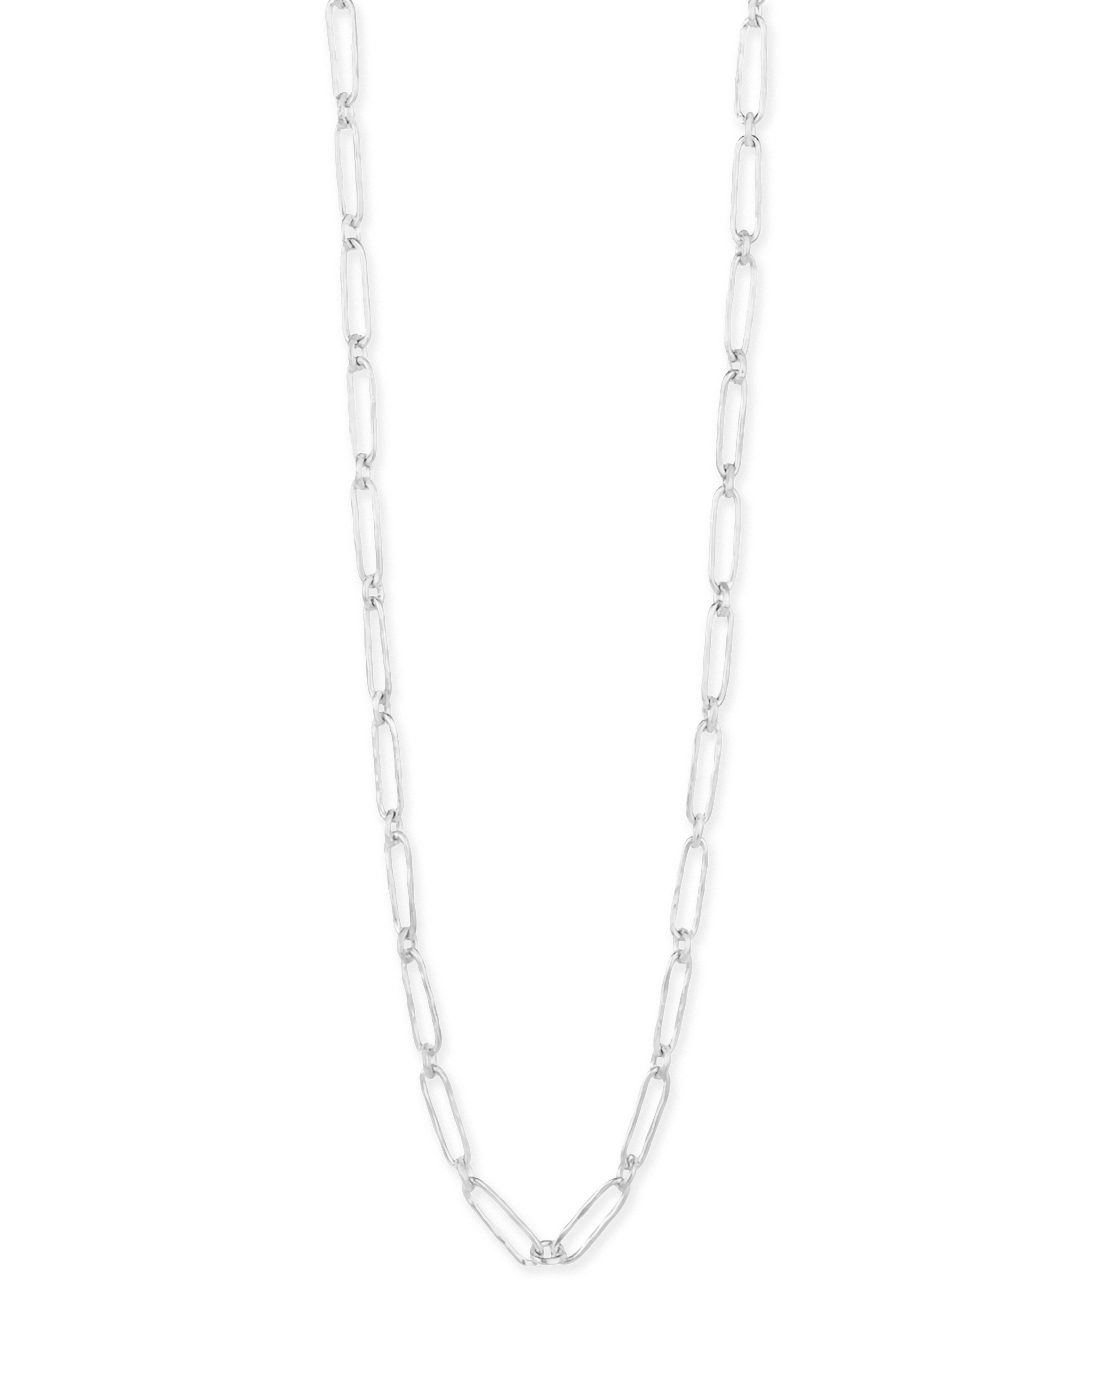 OVAL TO ROUND LINK NECKLACE IN SILVER